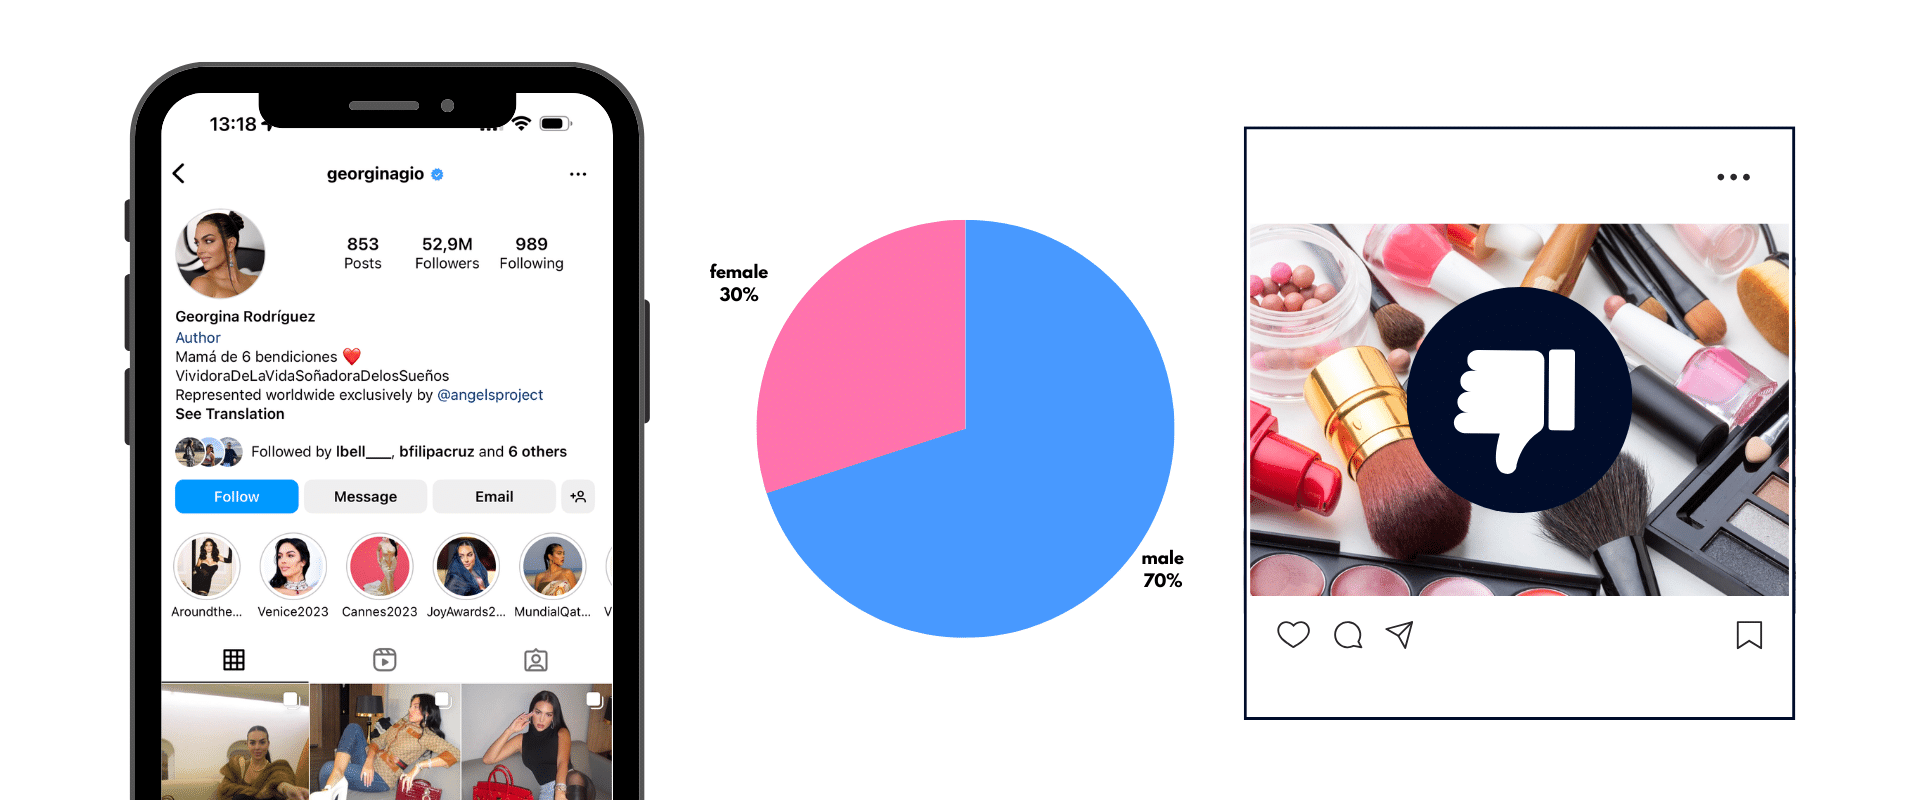 A phone with a pie chart on it and a pie chart next to it.